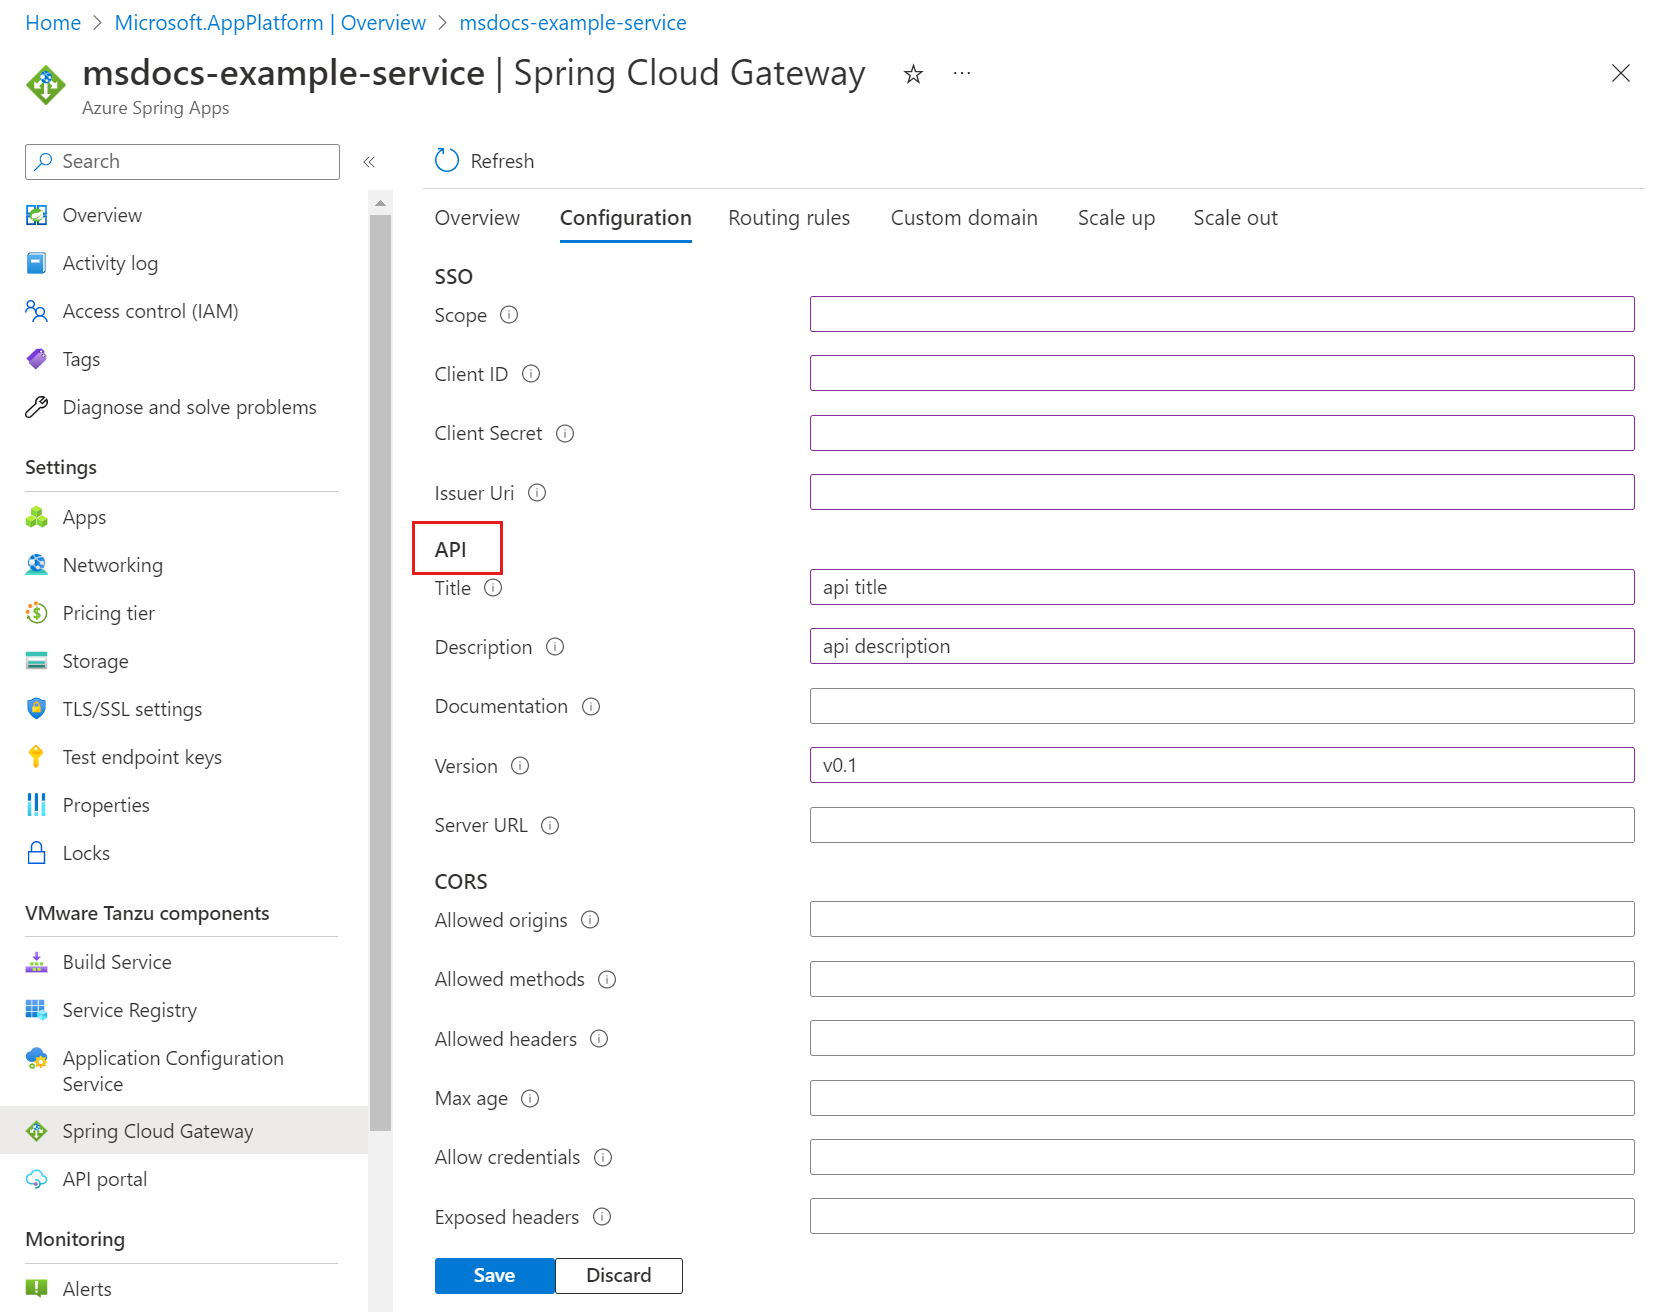 Screenshot of Azure portal showing Azure Spring Apps Spring Cloud Gateway page with Configuration pane showing.